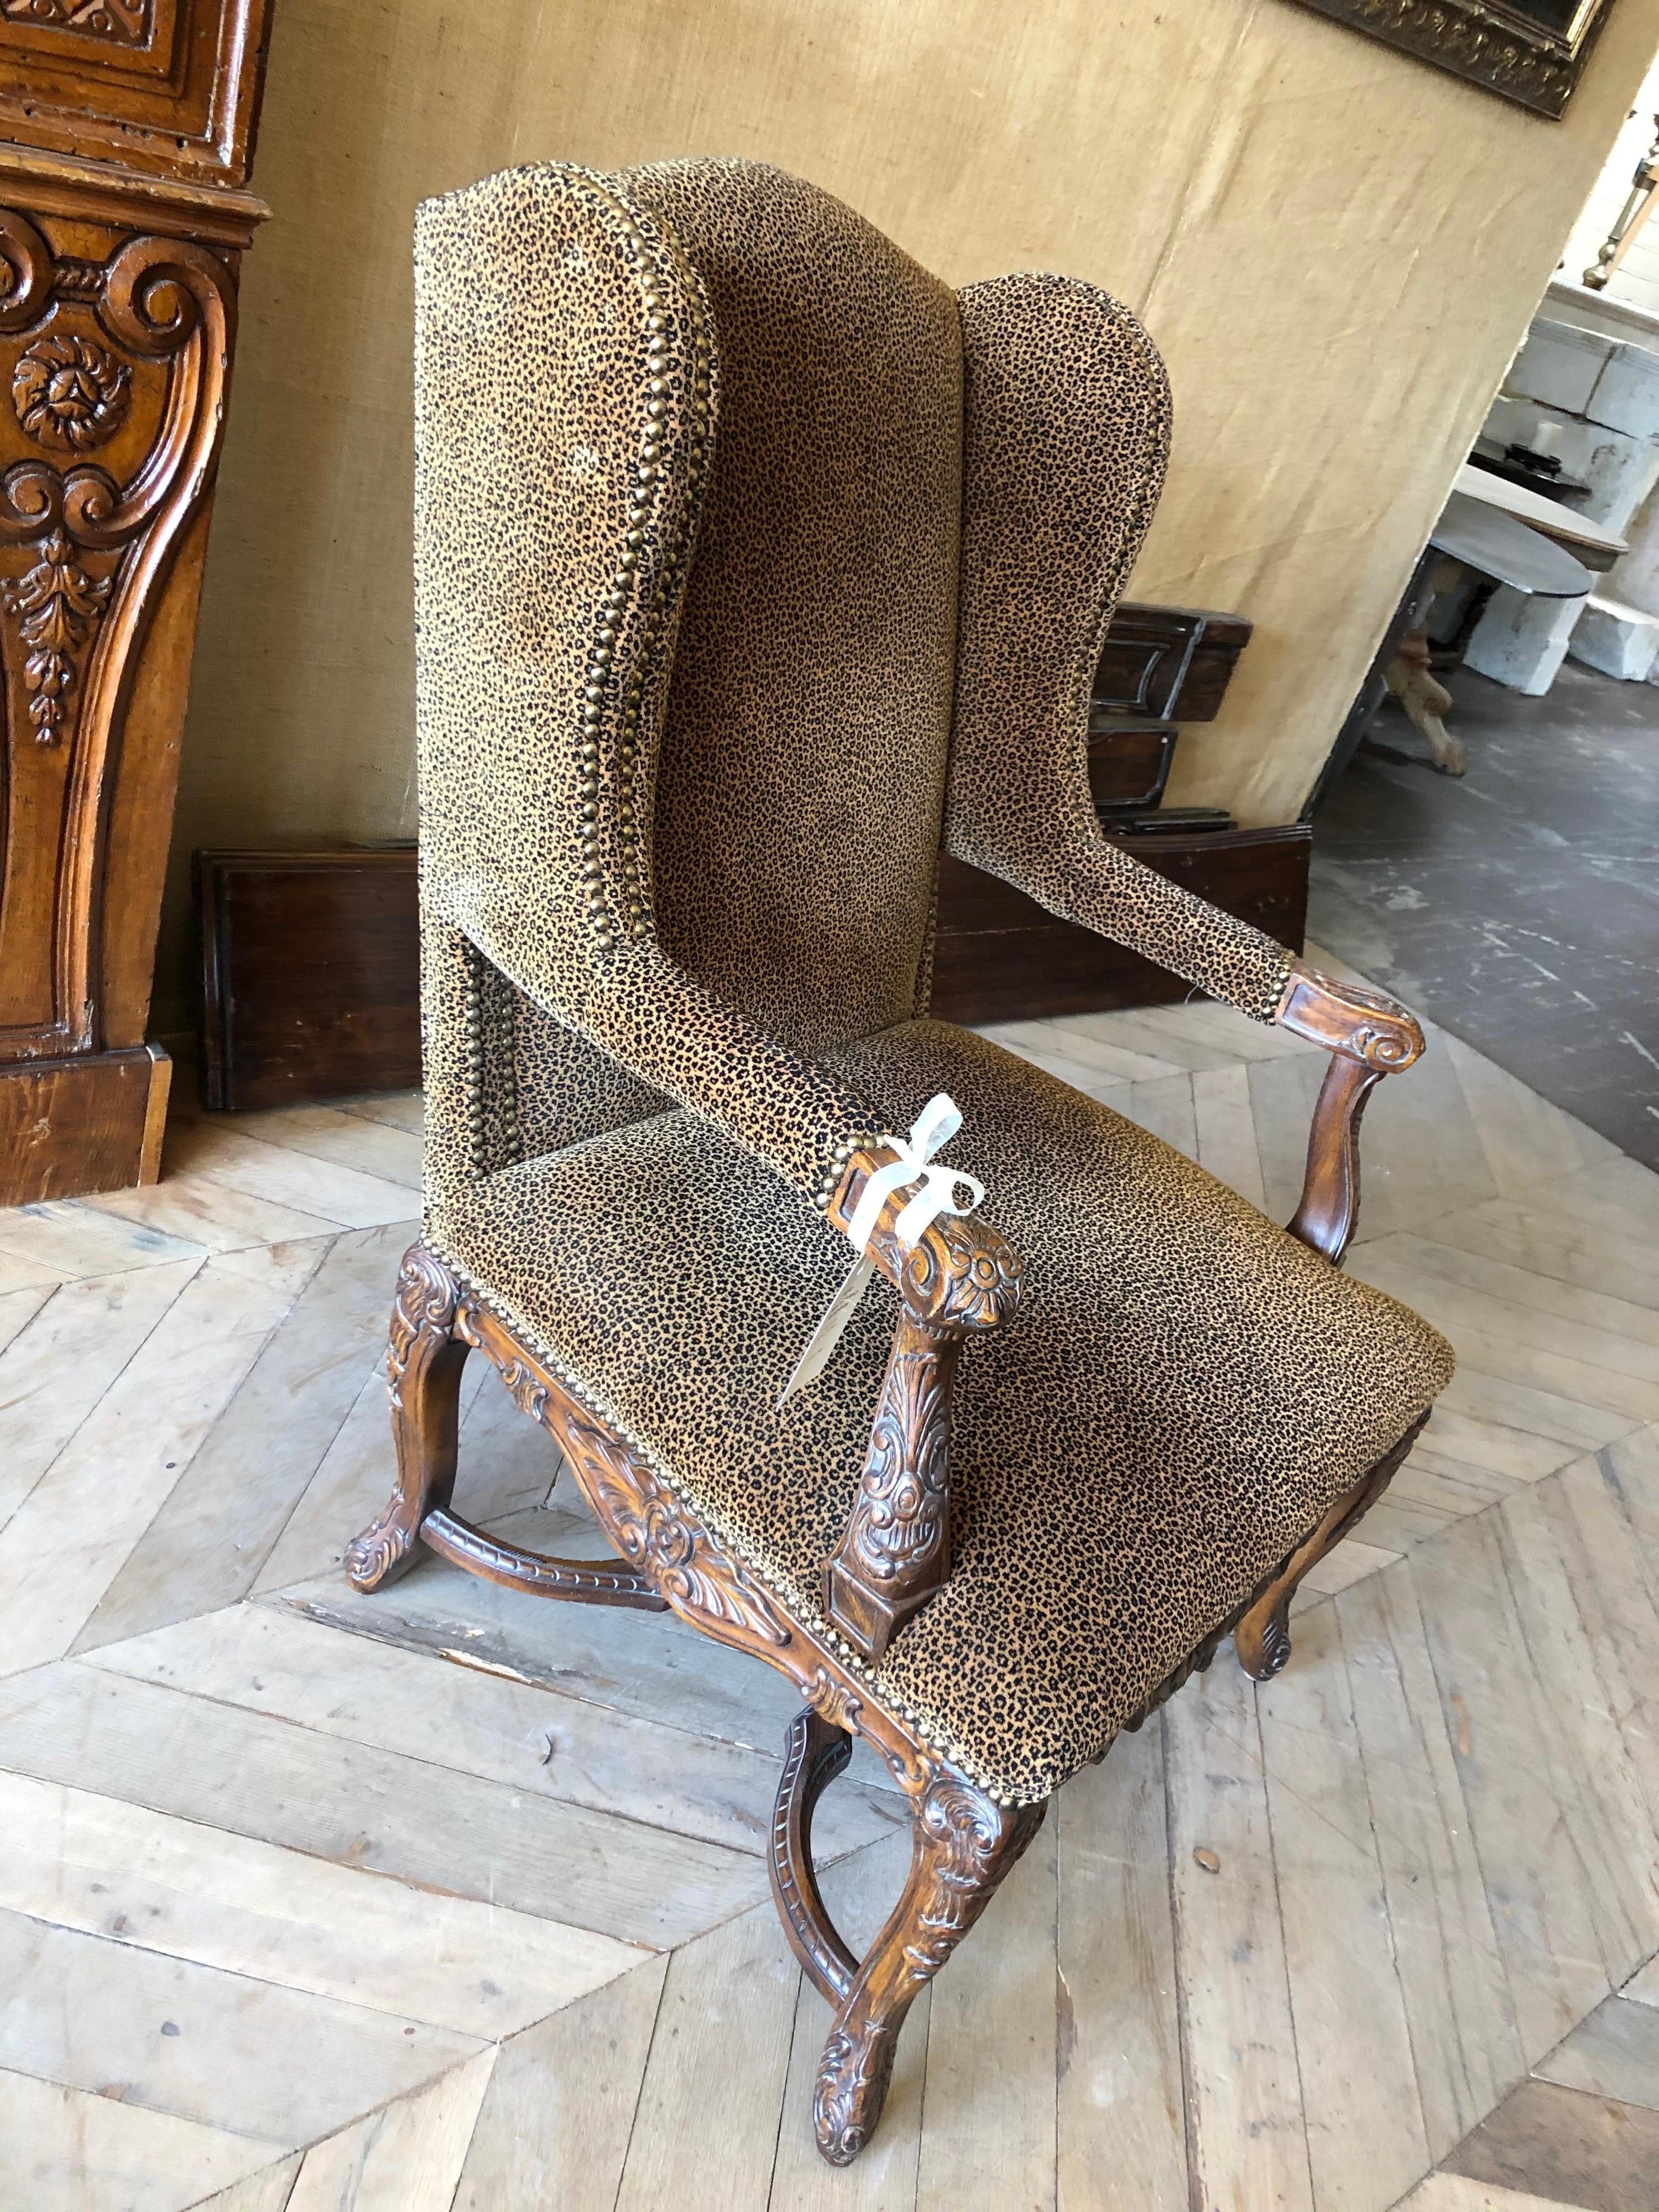 Wood Late 19th Century Louis XVI Wingback Chair With Leopard Upholstery